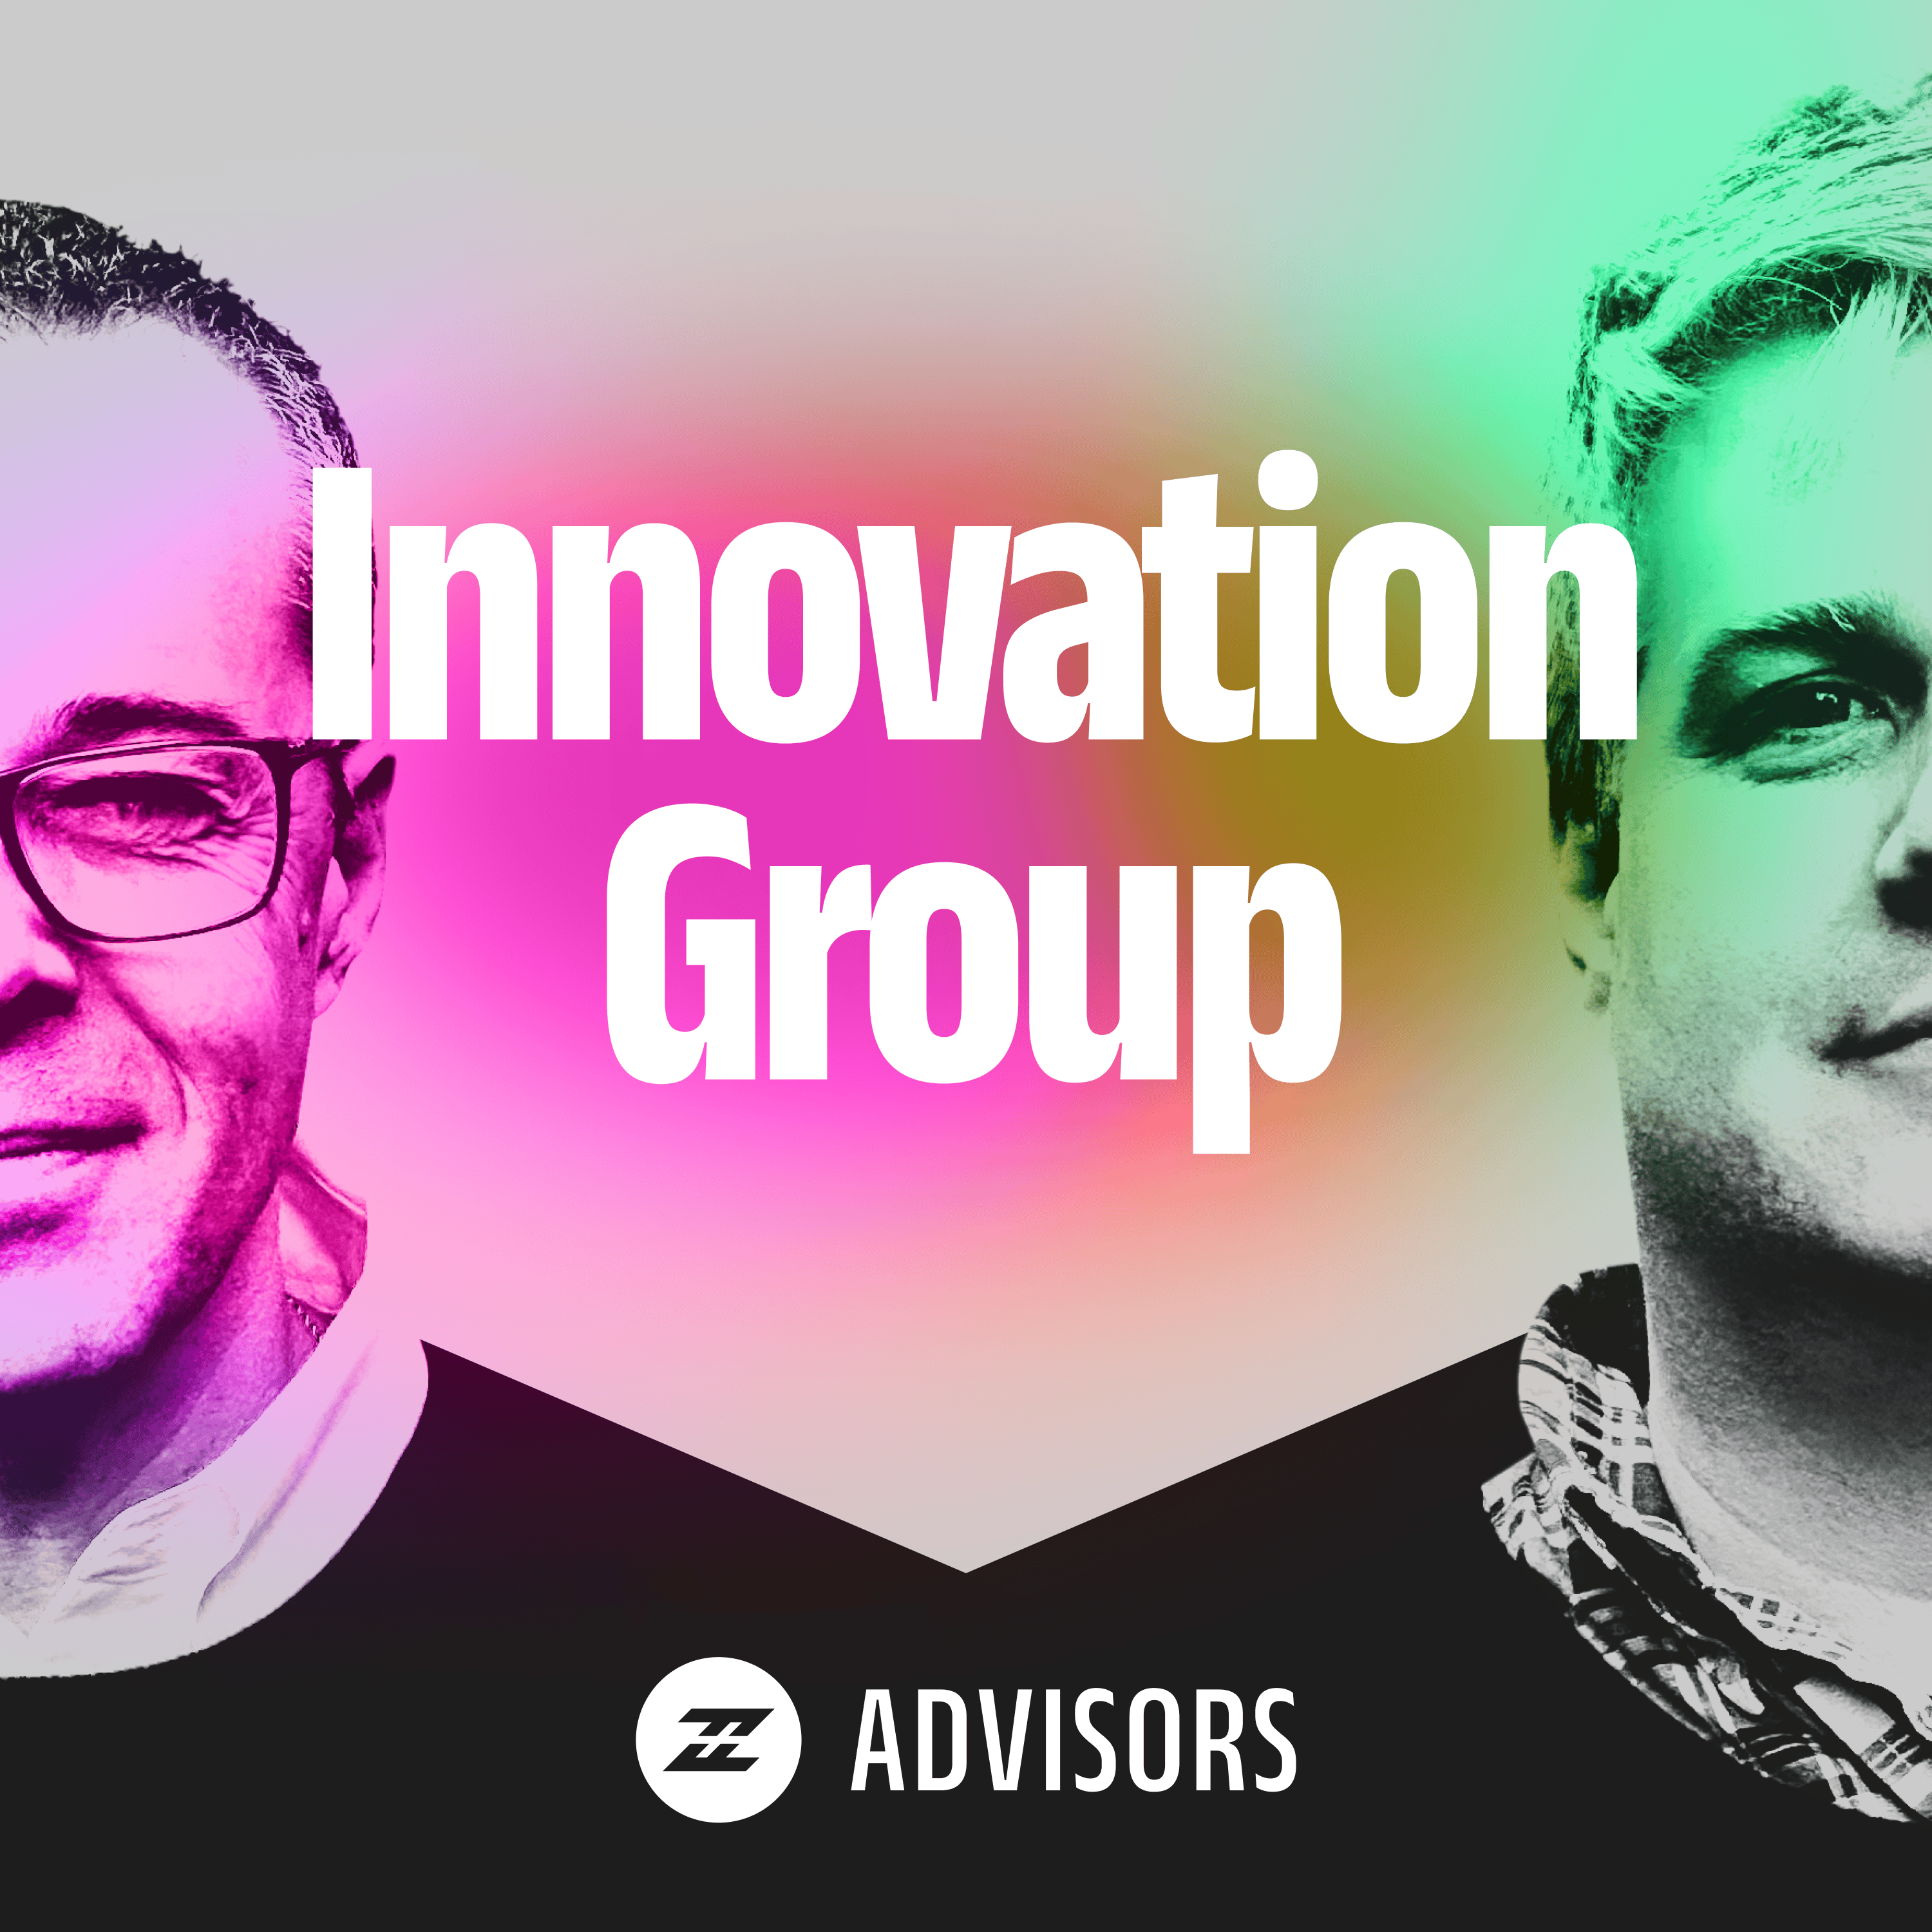 Artwork for podcast Ziade and Ford Advisors